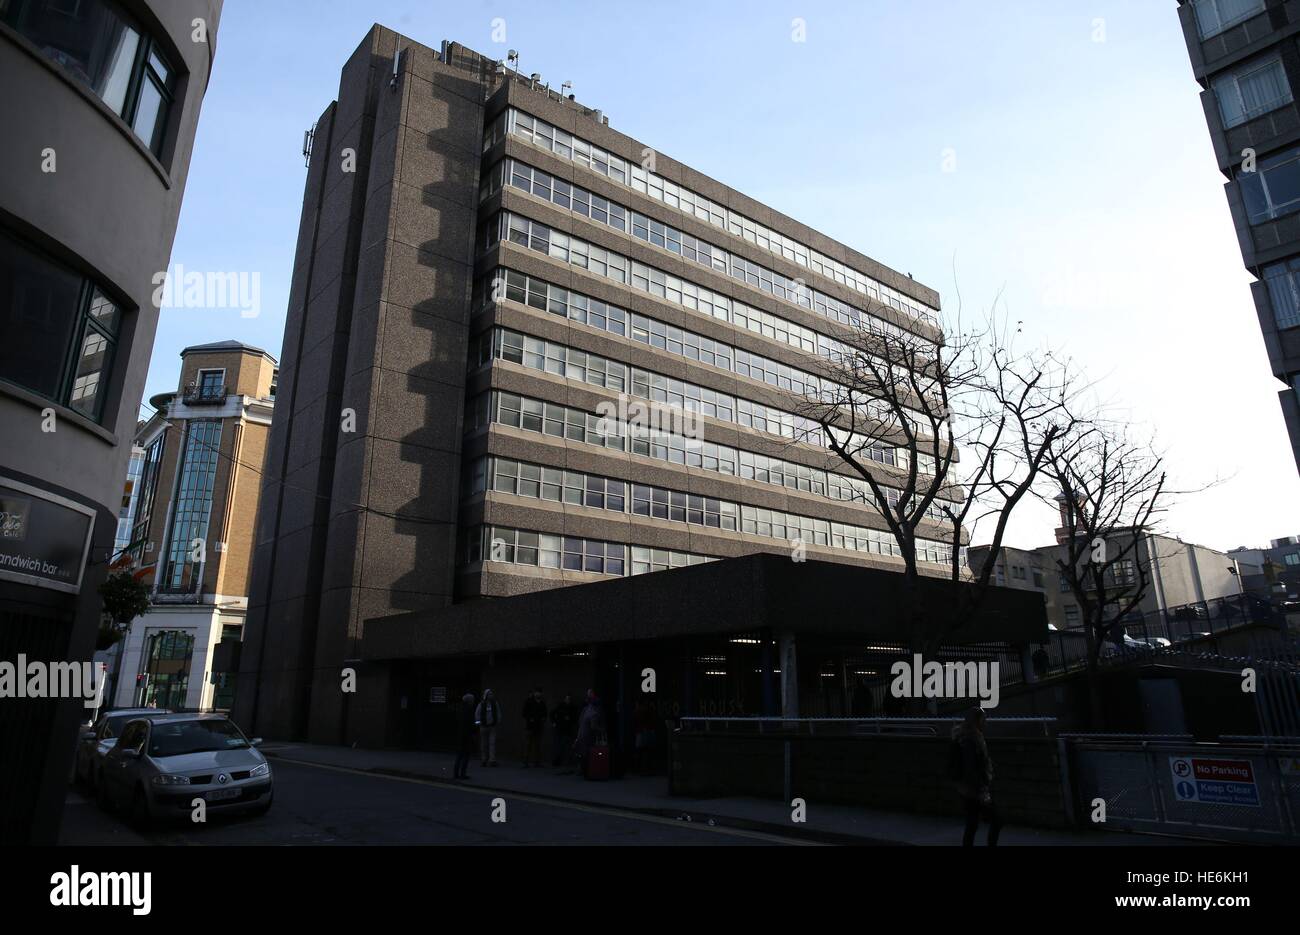 A general view of Apollo House, a vacant office block in Dublin city centre which has been occupied by the Homeless activist group 'Home Sweet Home'. Stock Photo